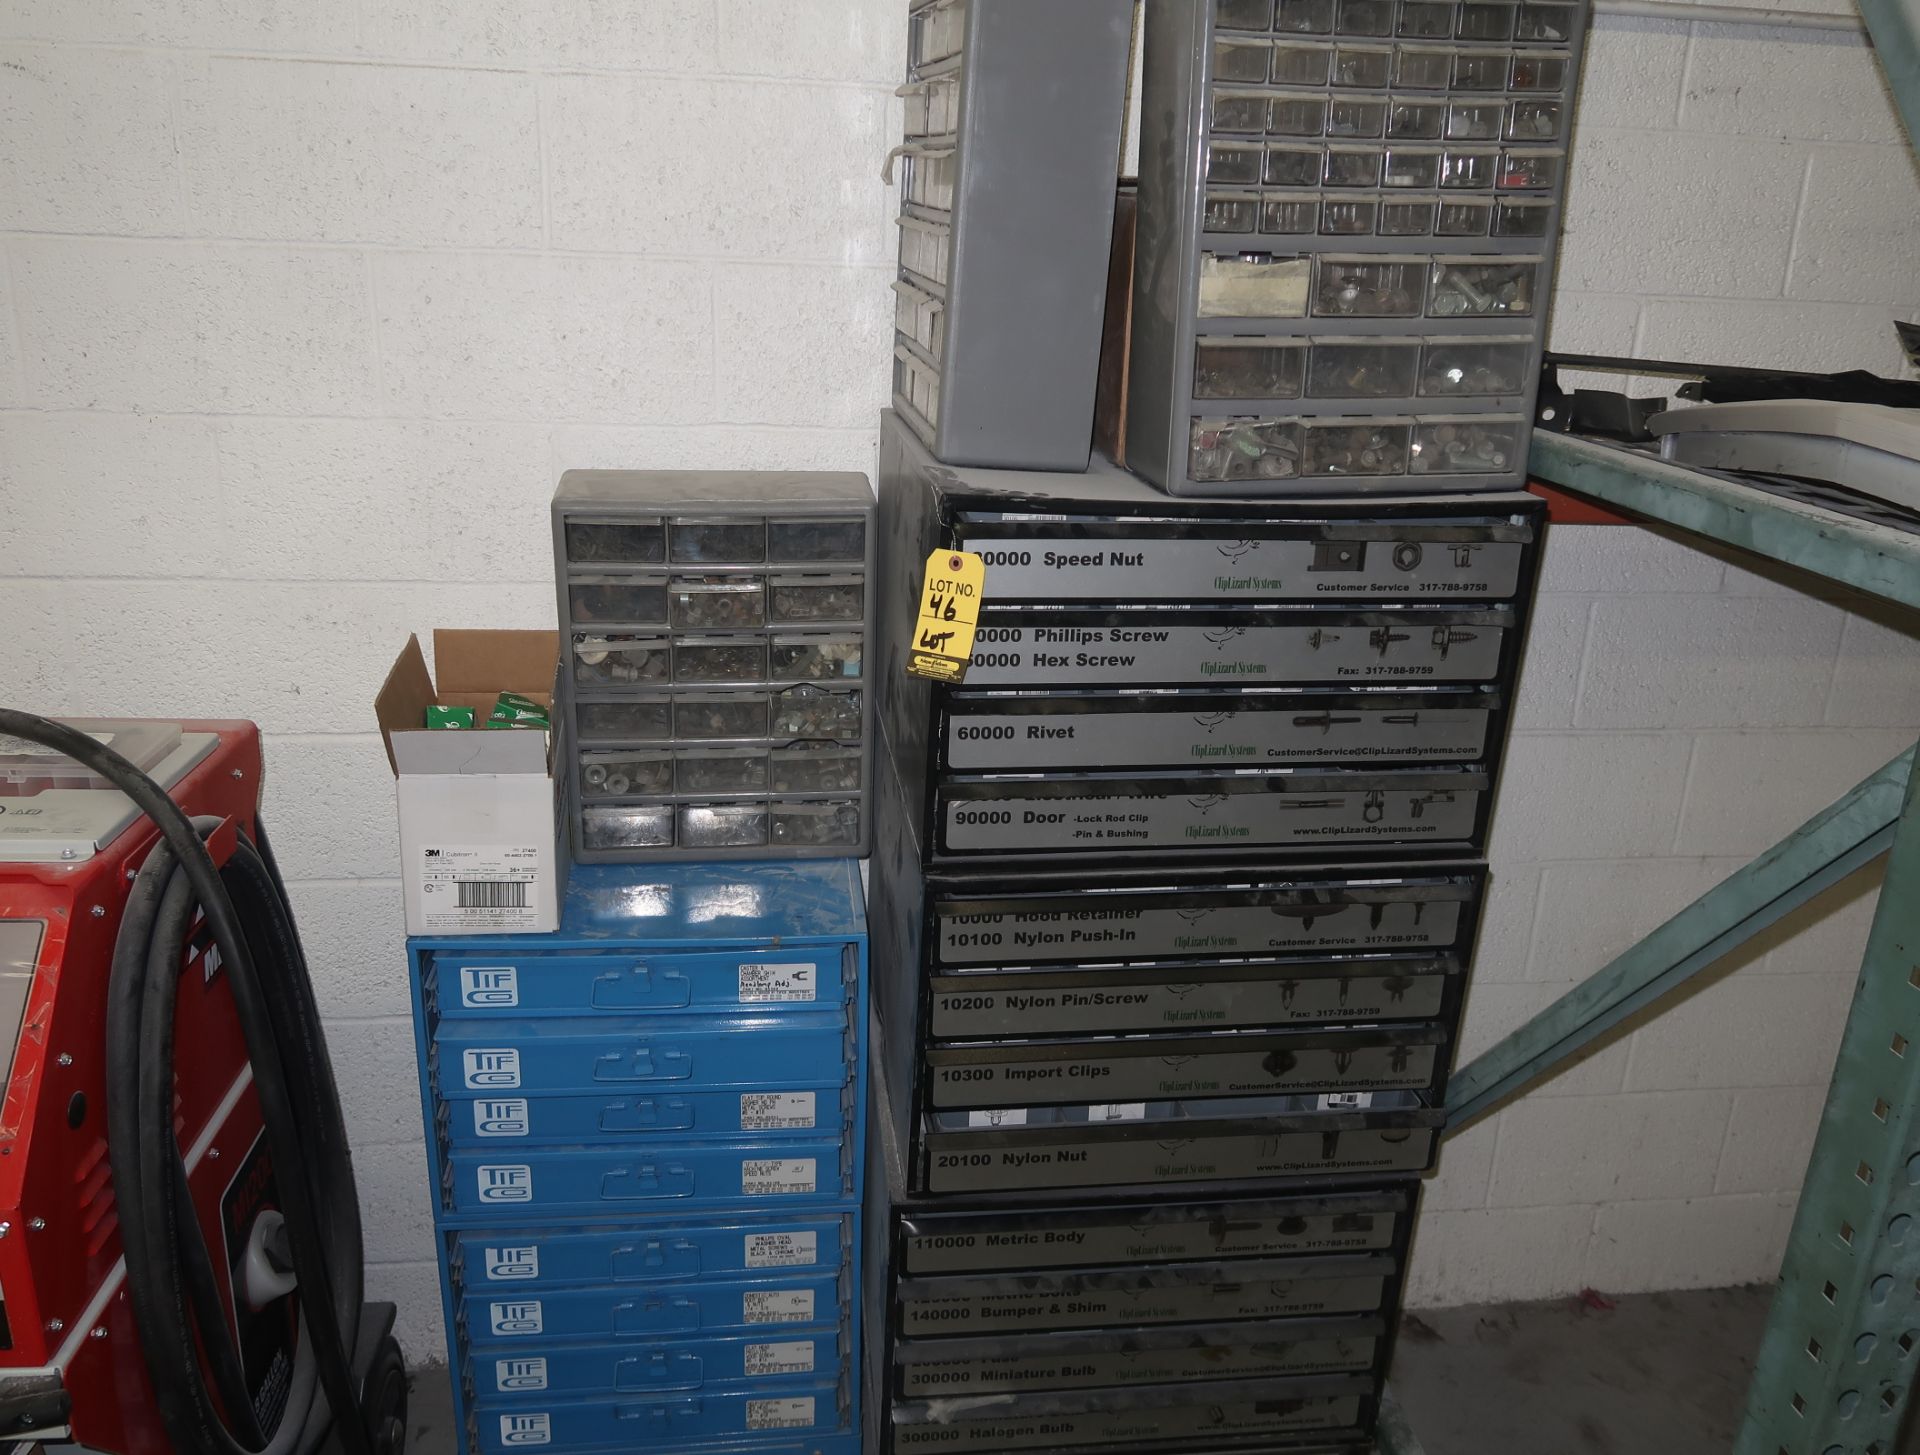 LOT CLIP LIZARD SYSTEMS CABINET (LOADED), TIFCO CABINET, ASST. PARTS CABINETS, ALL LOADED